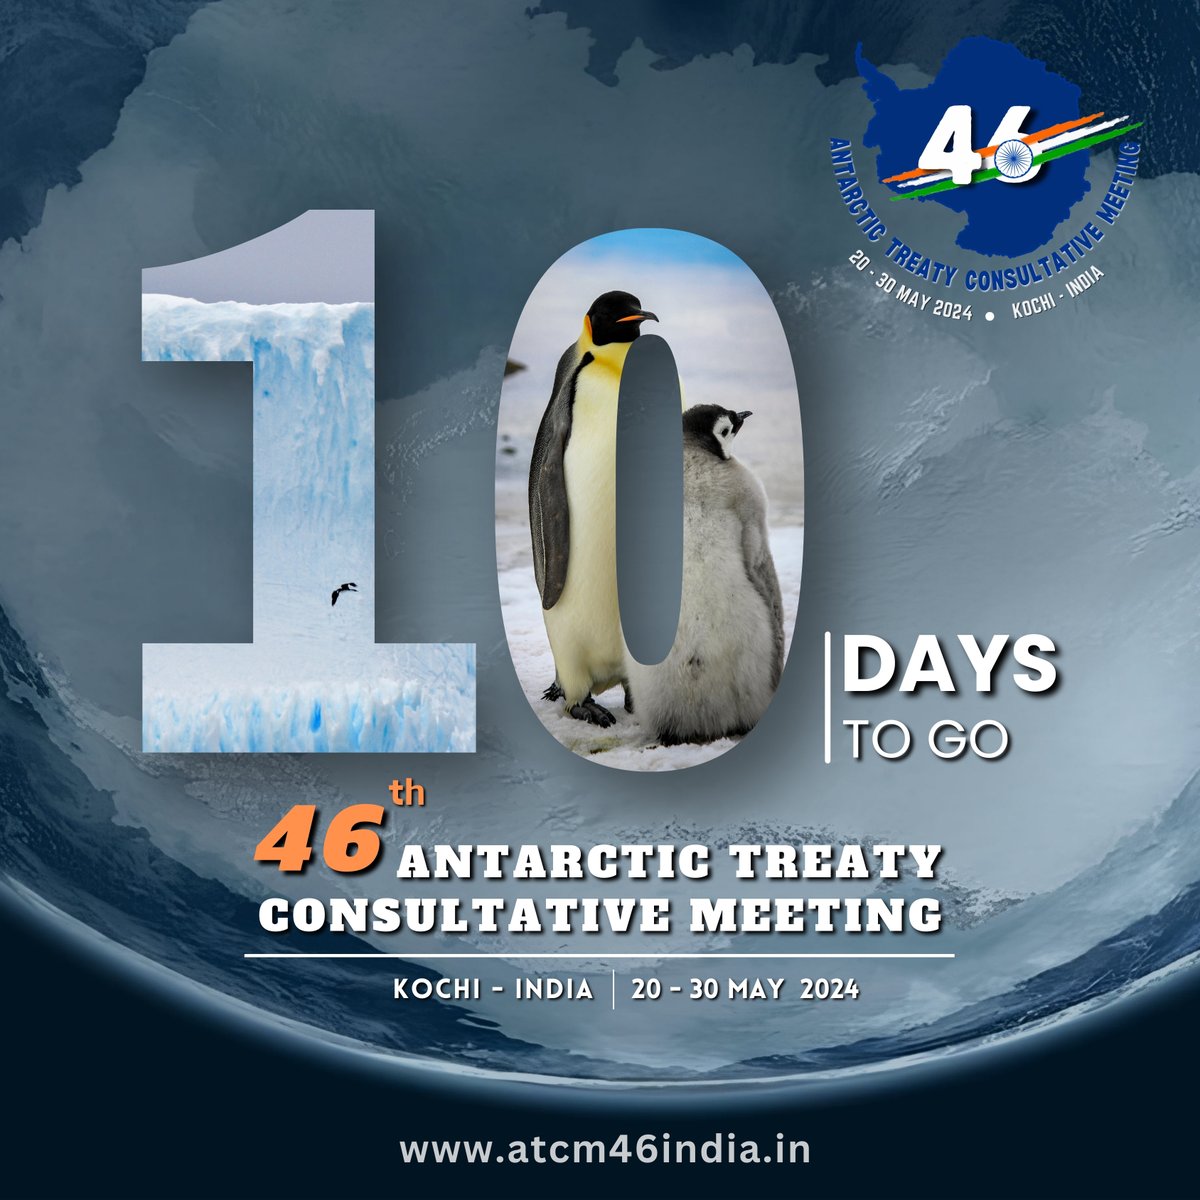 The countdown begins...⏳
10 Days to go!
India gears up to host the 46th Antarctic Treaty Consultative Meeting (#ATCM46) and the 26th Meeting of the Committee for Environmental Protection (#CEP26) from May 20-30, 2024, in #Kochi, Kerala.
@AntarcticTreaty @moesgoi @TMeloth